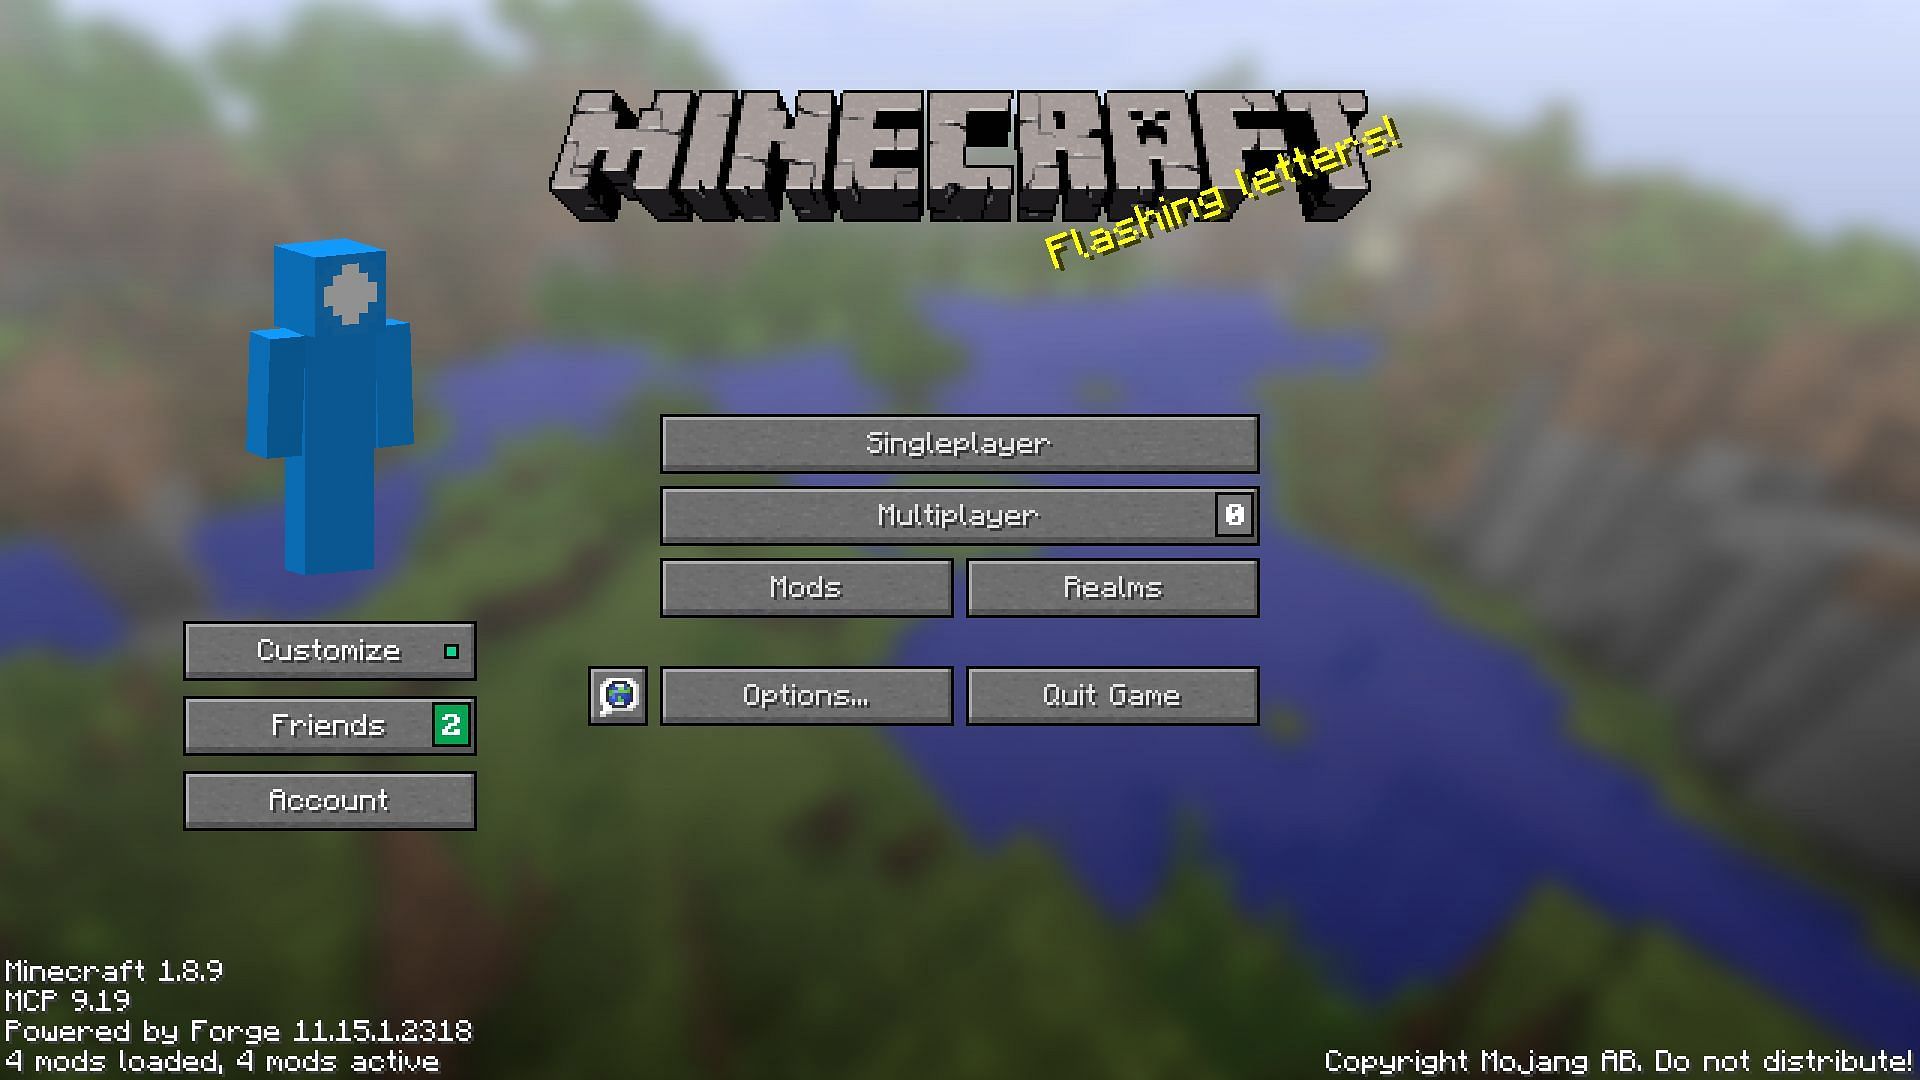 How To Download & Install Essential Mod in Minecraft 1.19.4 